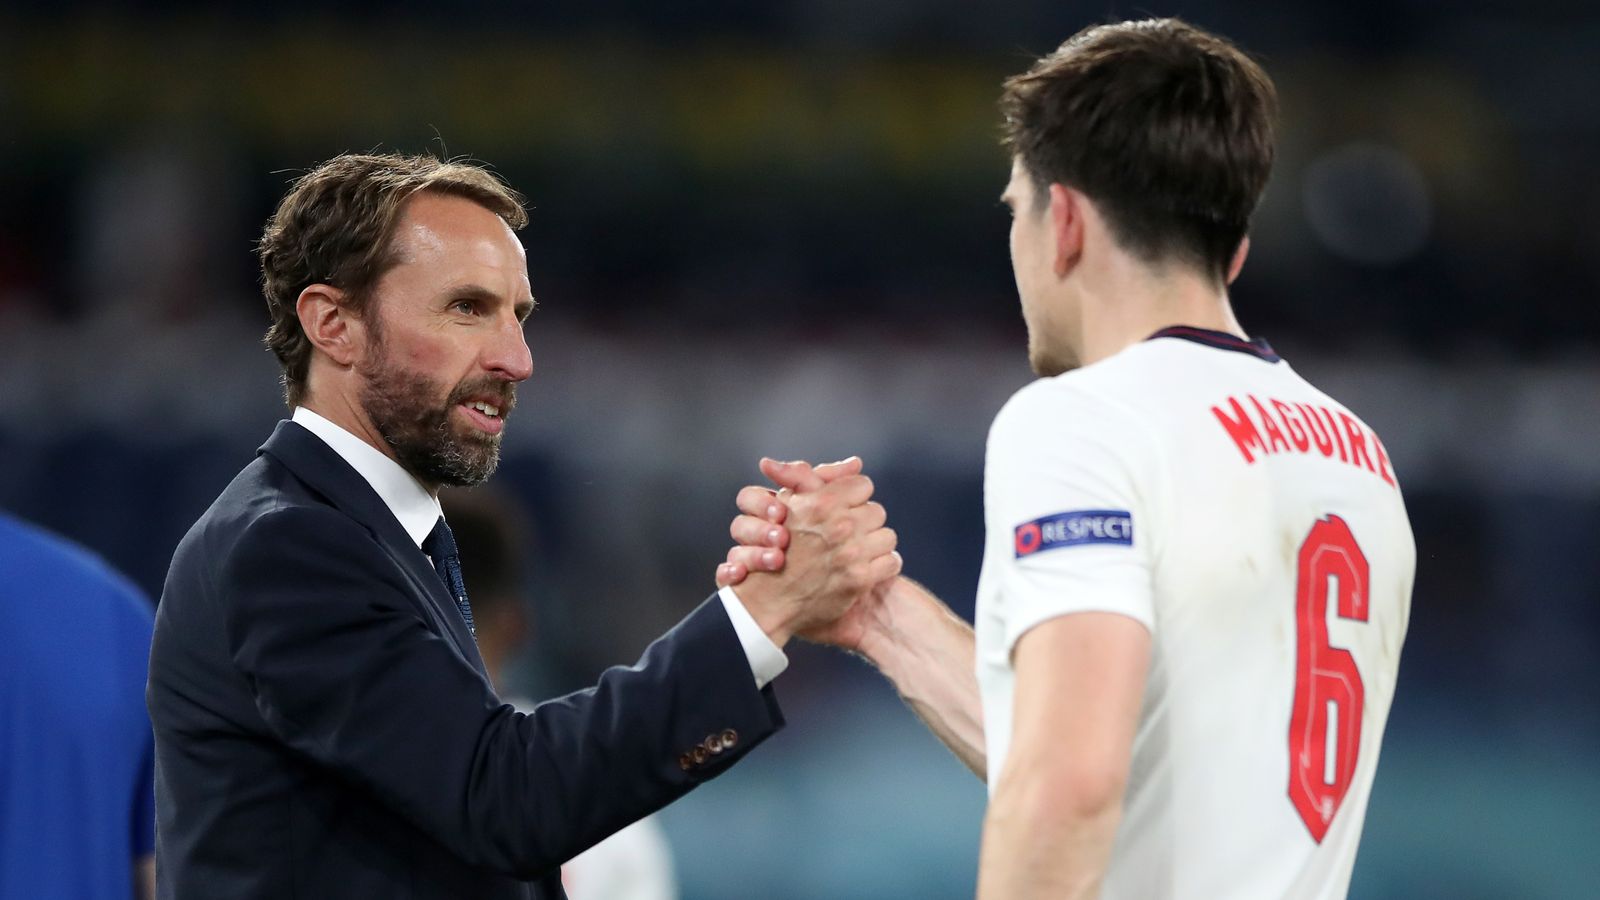 Gareth Southgate challenges players to create history and reach a major final with England after Ukraine victory